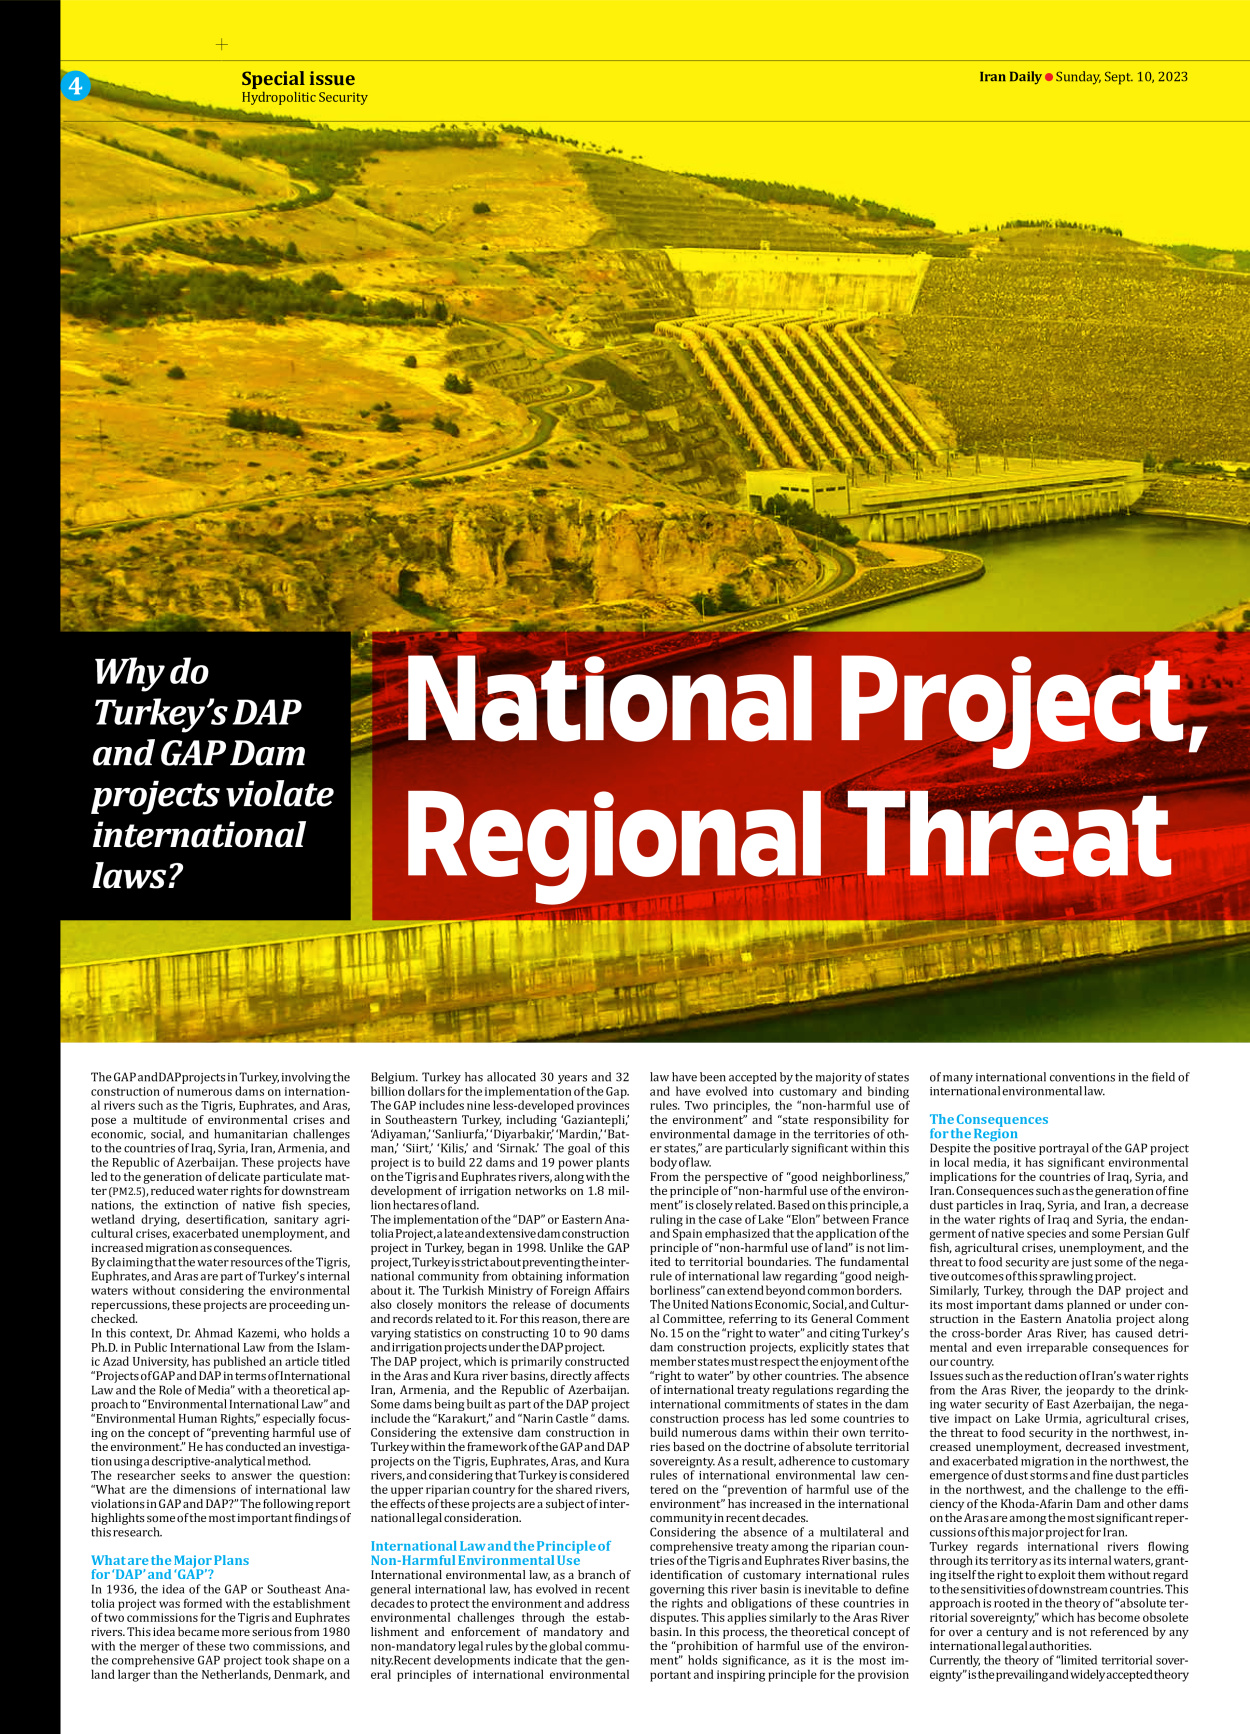 Iran Daily - Number Seven Thousand Three Hundred and Eighty Three - 10 September 2023 - Page 4